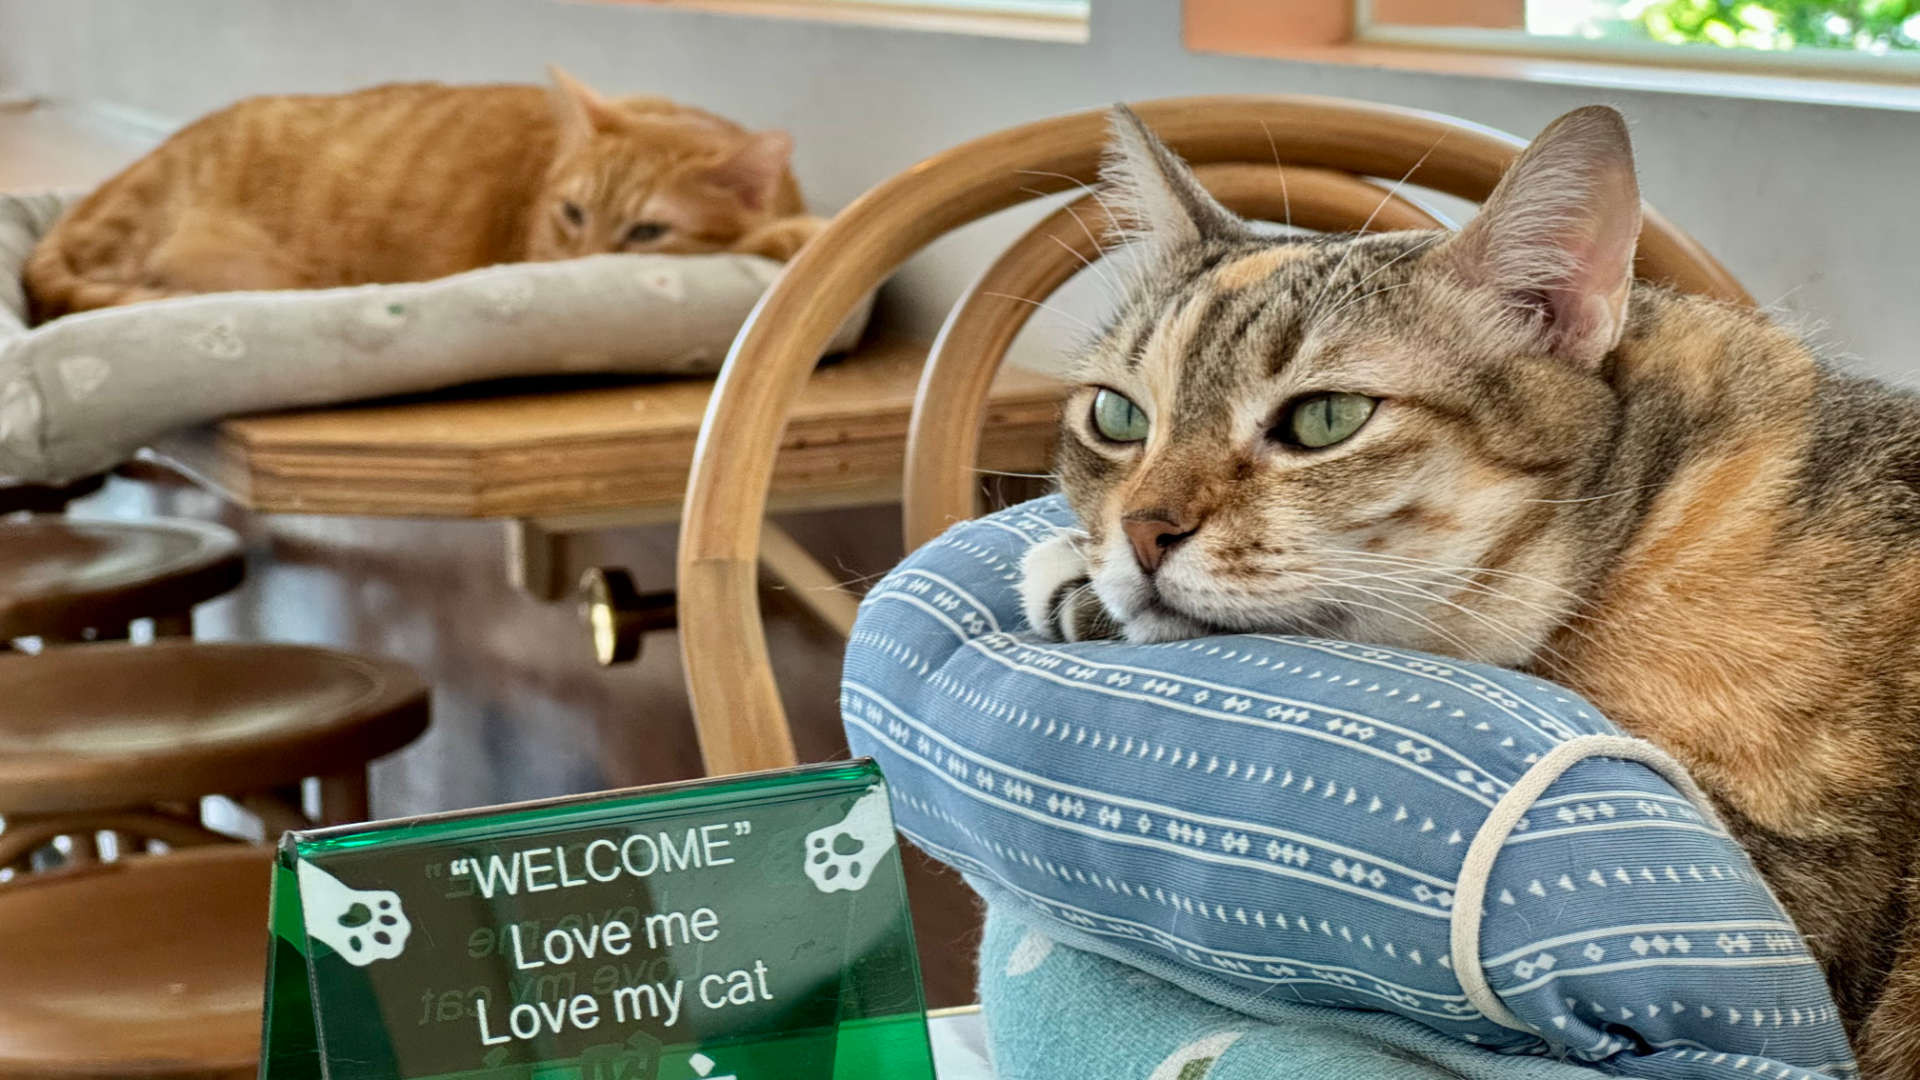 Two cats resting on cat beds. Next to one of the cats is a sign that says “Welcome. Love me. Love my cat.”